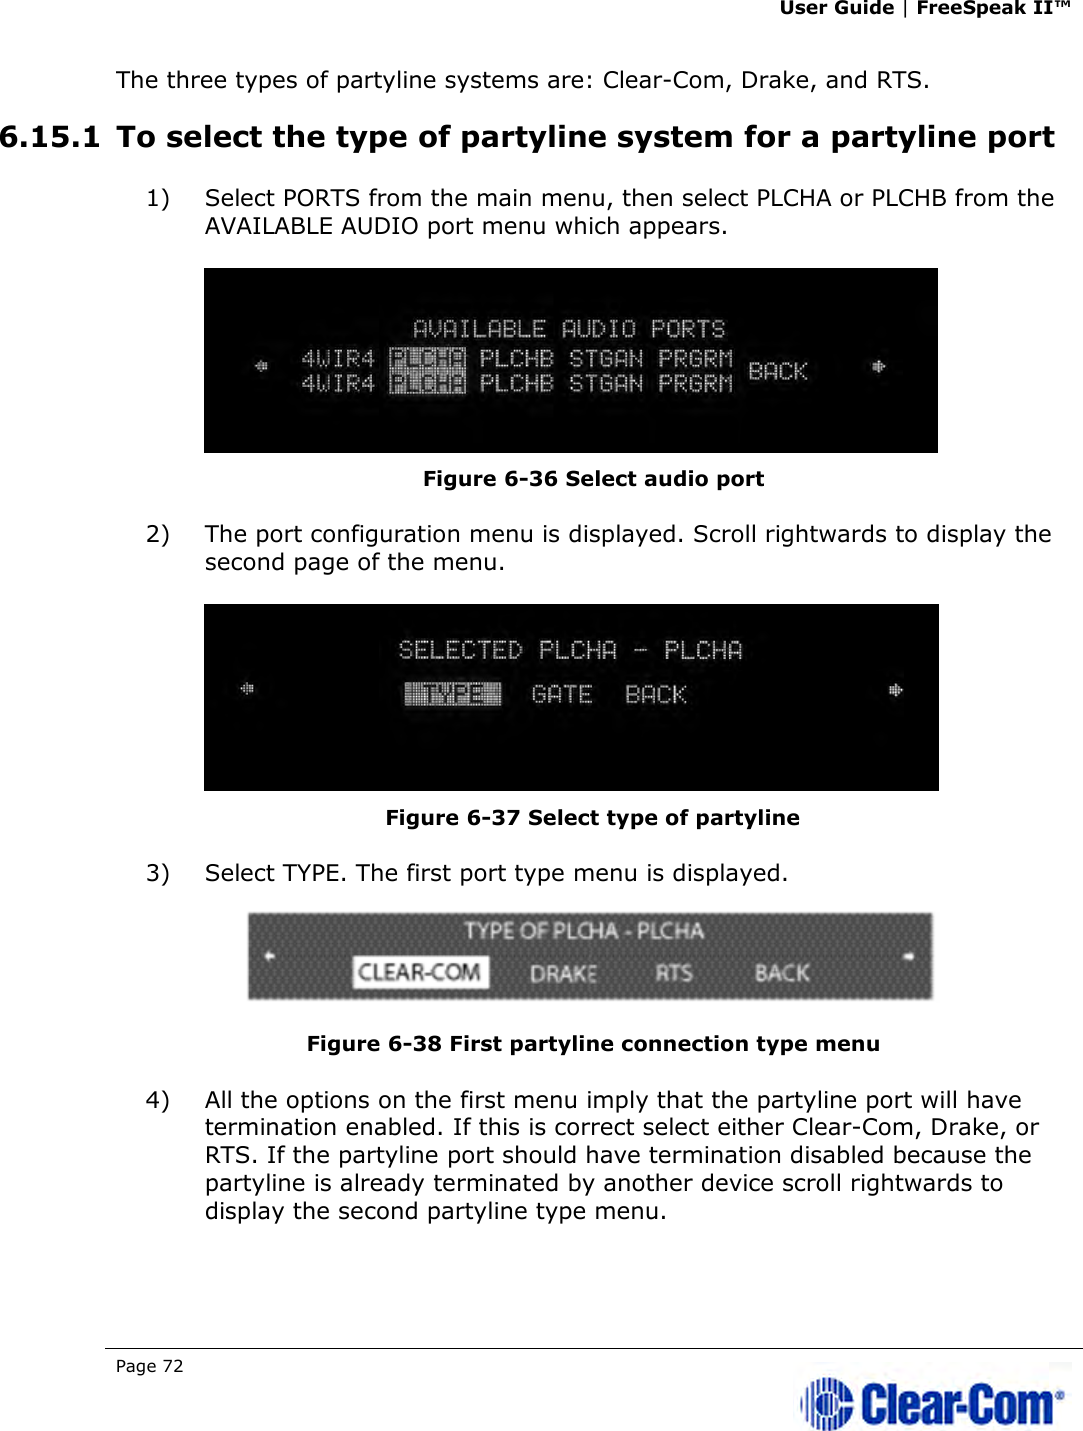 User Guide | FreeSpeak II™  Page 72   The three types of partyline systems are: Clear-Com, Drake, and RTS.  6.15.1 To select the type of partyline system for a partyline port 1) Select PORTS from the main menu, then select PLCHA or PLCHB from the AVAILABLE AUDIO port menu which appears.  Figure 6-36 Select audio port 2) The port configuration menu is displayed. Scroll rightwards to display the second page of the menu.  Figure 6-37 Select type of partyline  3) Select TYPE. The first port type menu is displayed.  Figure 6-38 First partyline connection type menu 4) All the options on the first menu imply that the partyline port will have termination enabled. If this is correct select either Clear-Com, Drake, or RTS. If the partyline port should have termination disabled because the partyline is already terminated by another device scroll rightwards to display the second partyline type menu. 